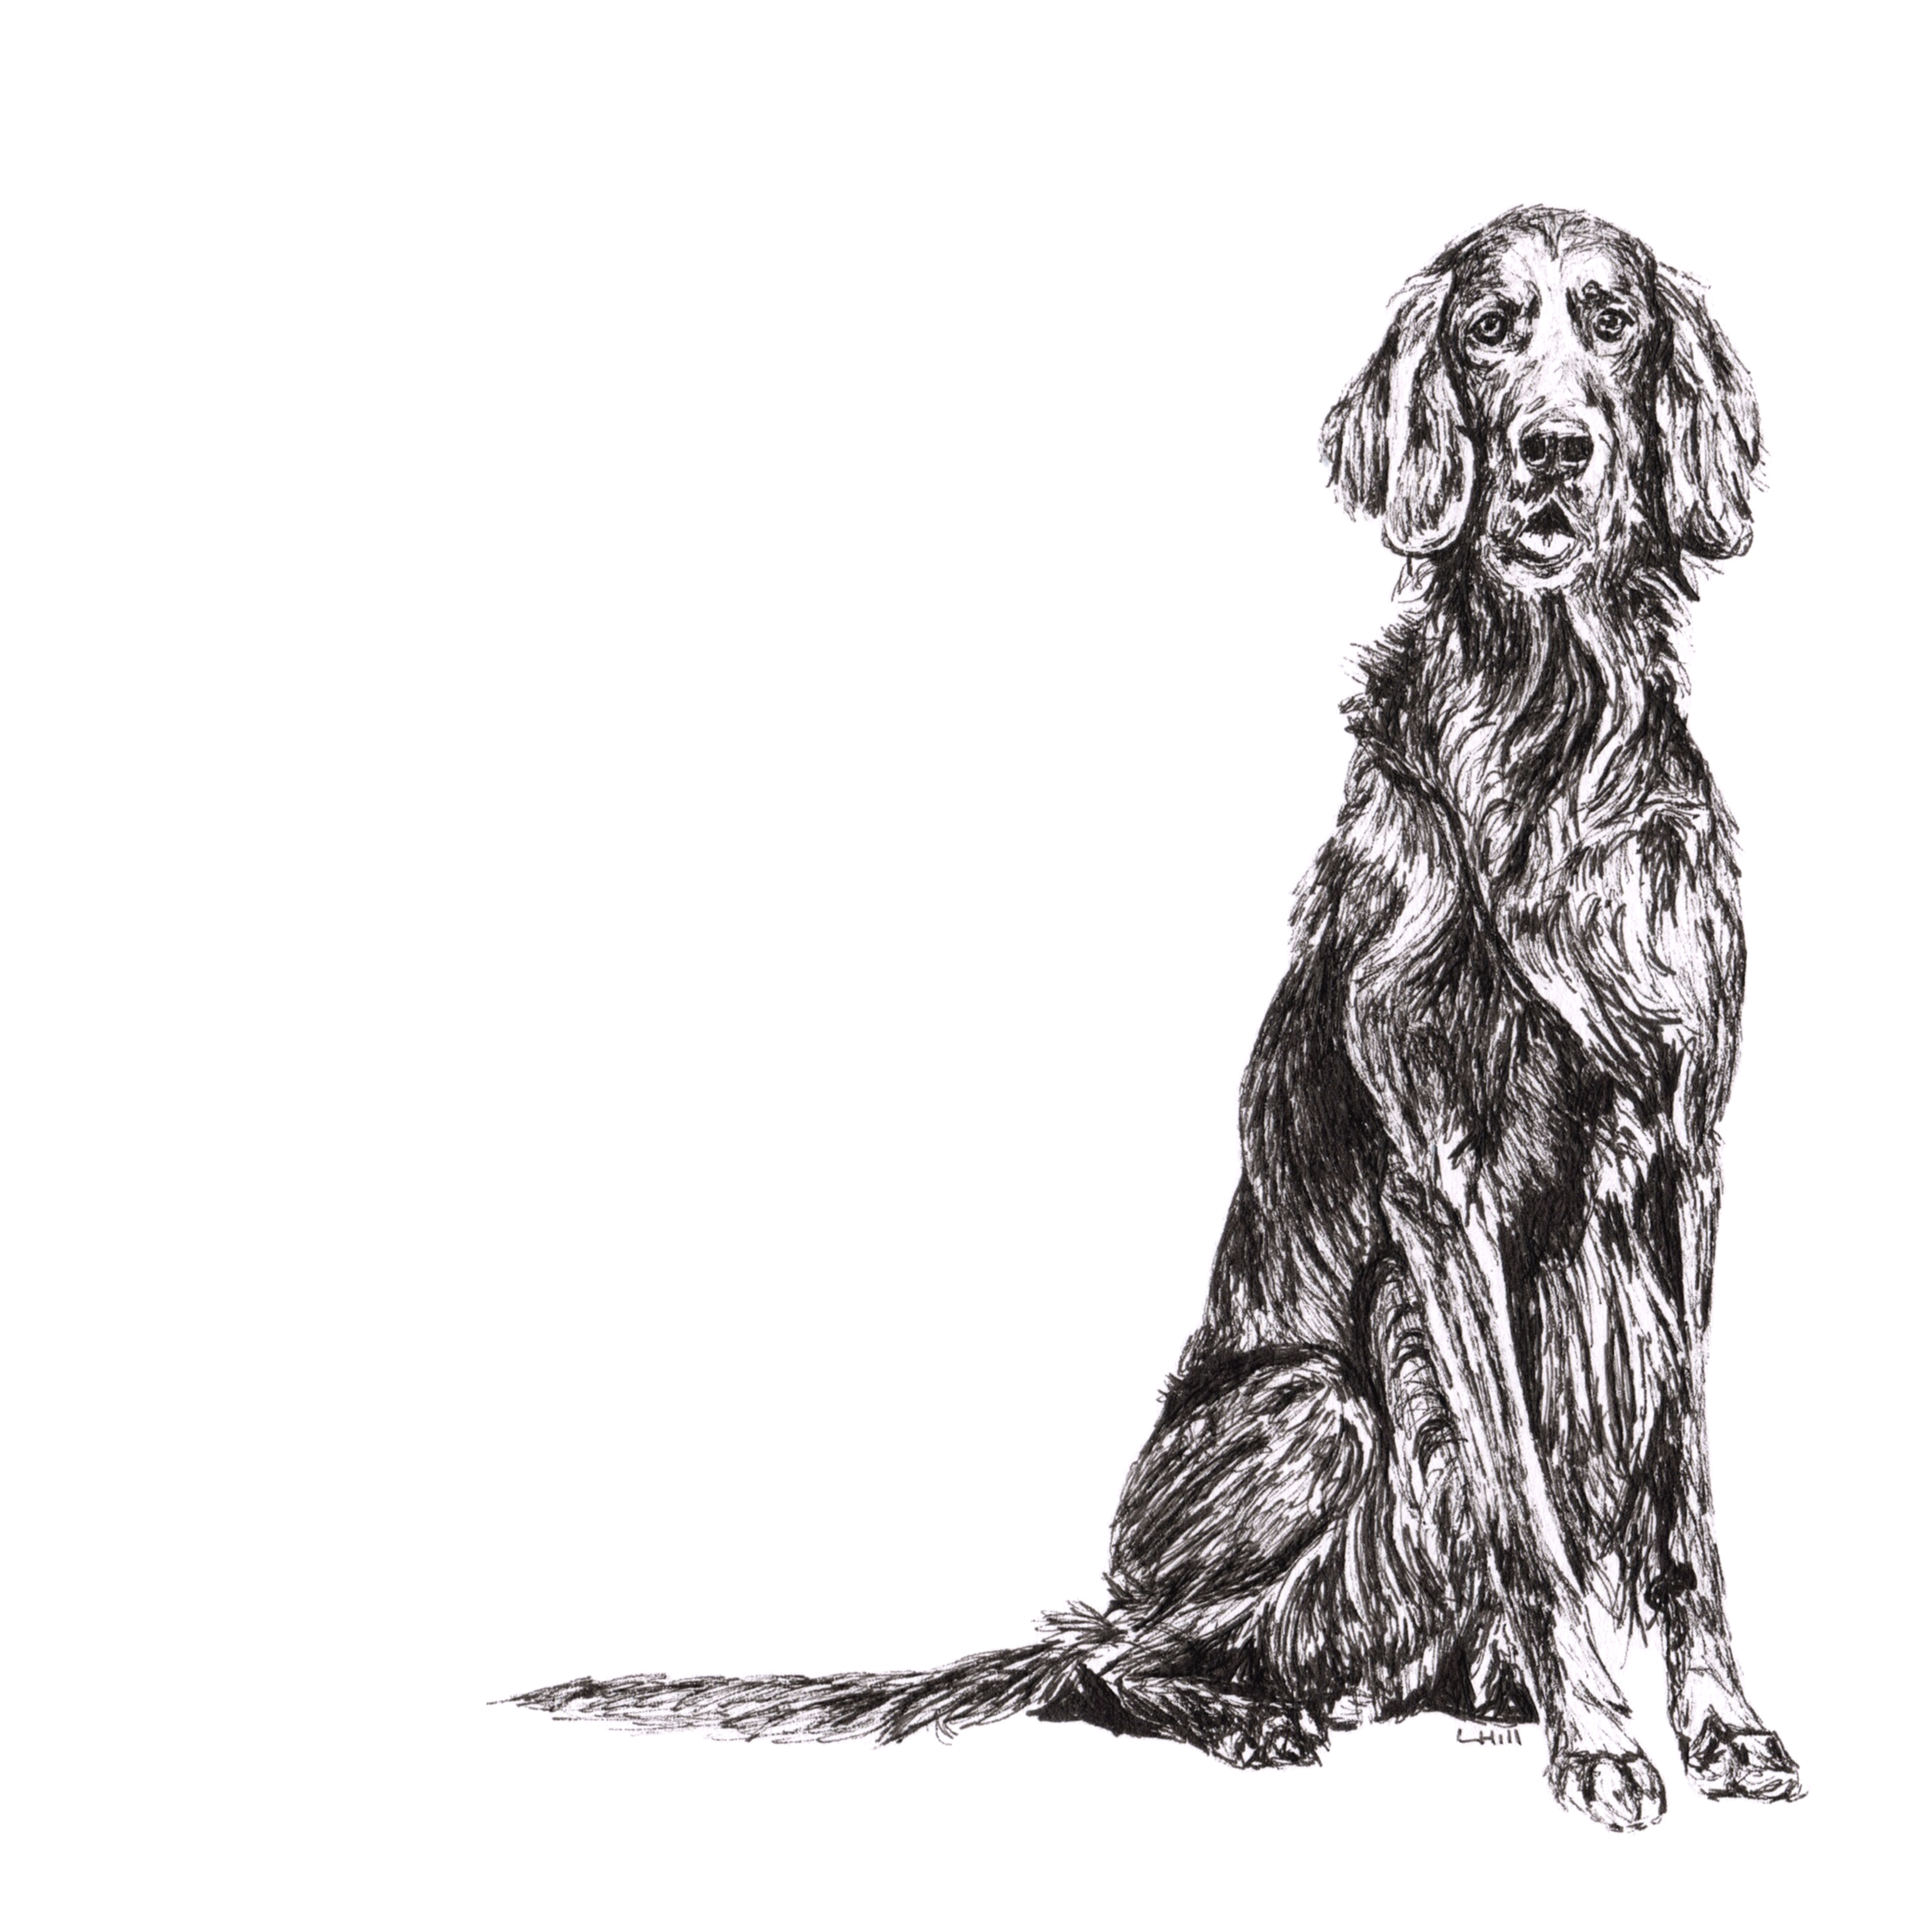 English Setter pen and ink illustration by Louisa Hill